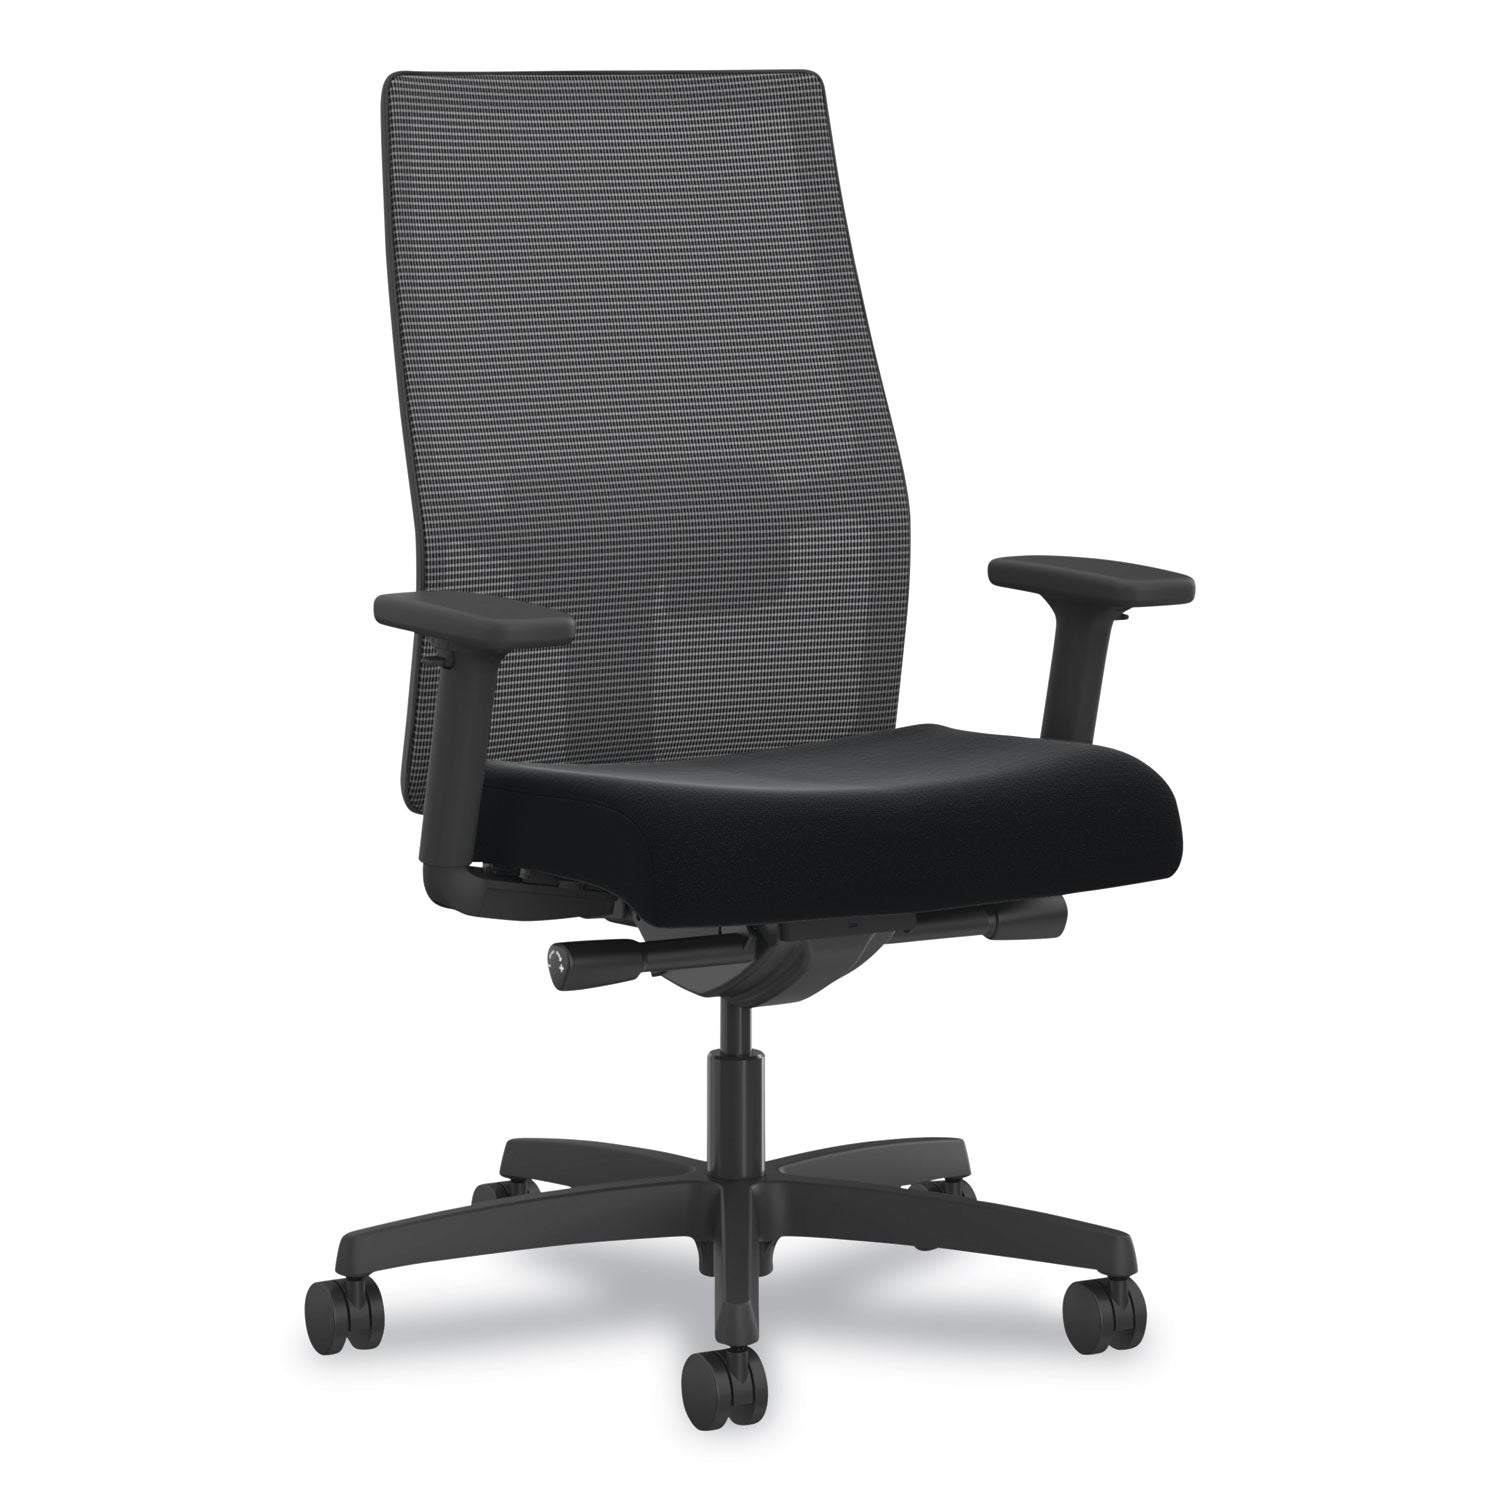 ignition-20-4-way-stretch-mid-back-mesh-task-chair-gray-adjustable-lumbar-support-black-ships-in-7-10-business-days_honi2mm2amc10tt - 1